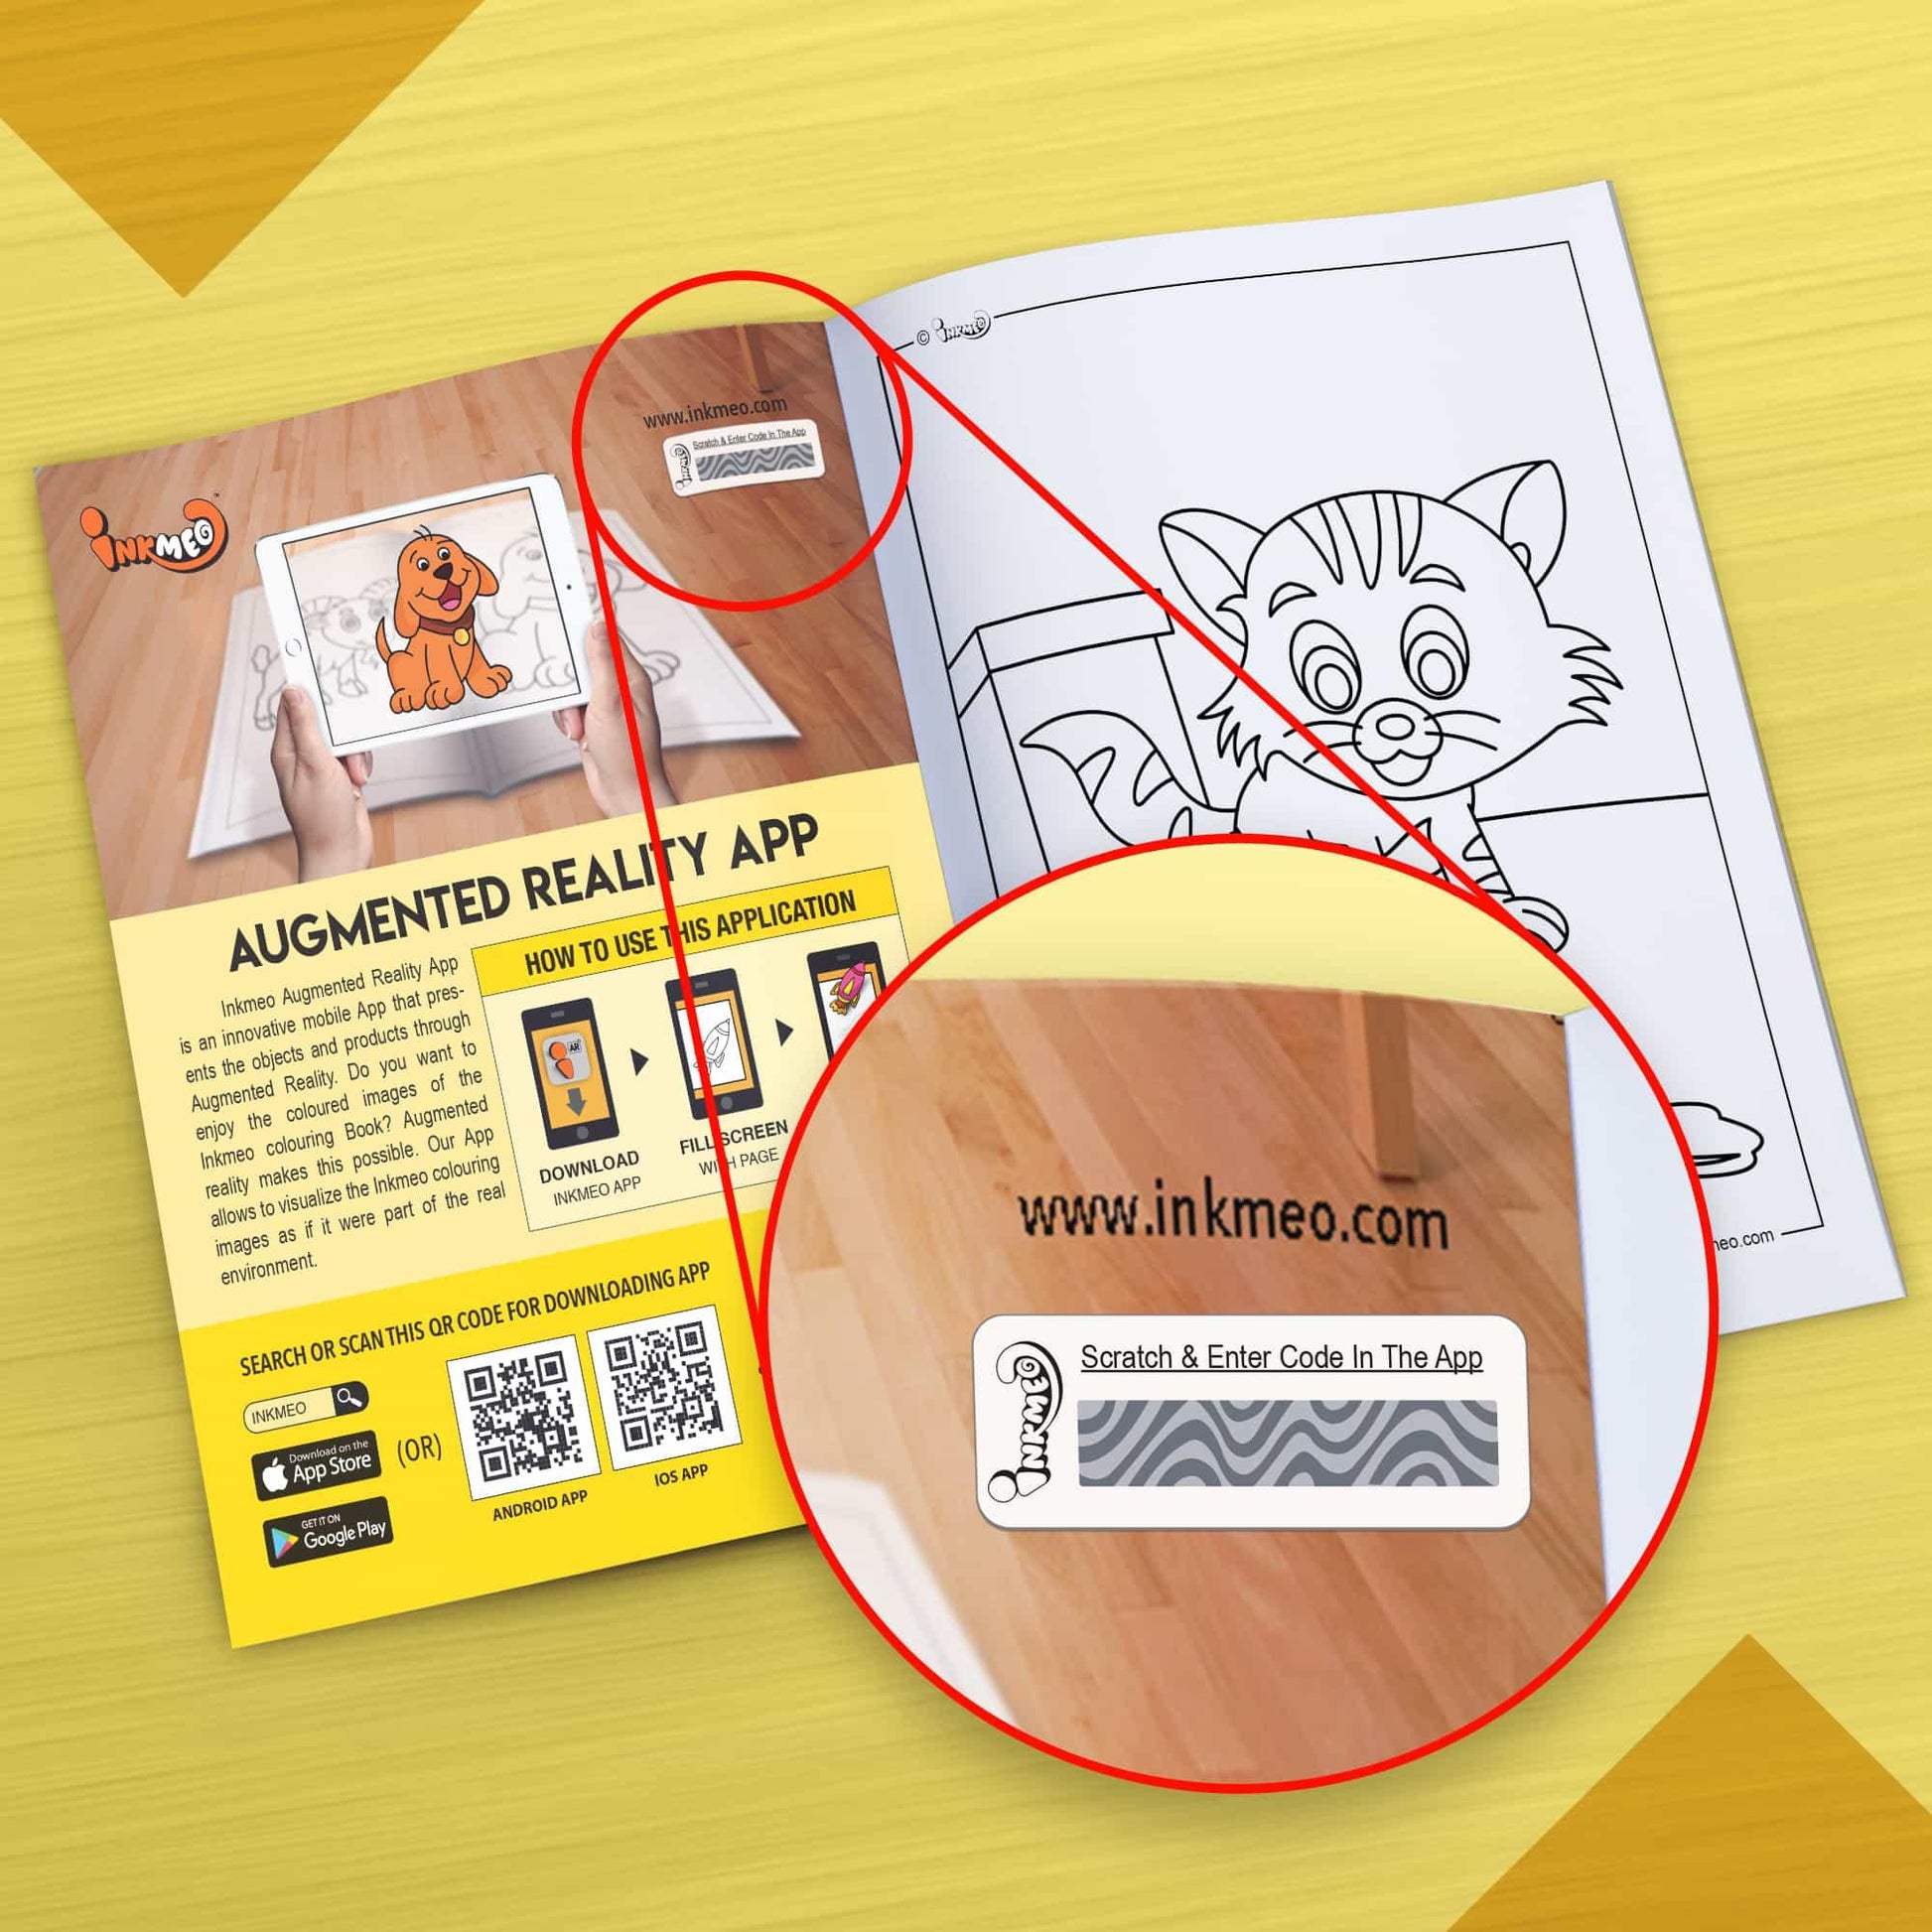 The image depicts a yellow background with an open book placed on it, with an activation code zoomed in from the book.